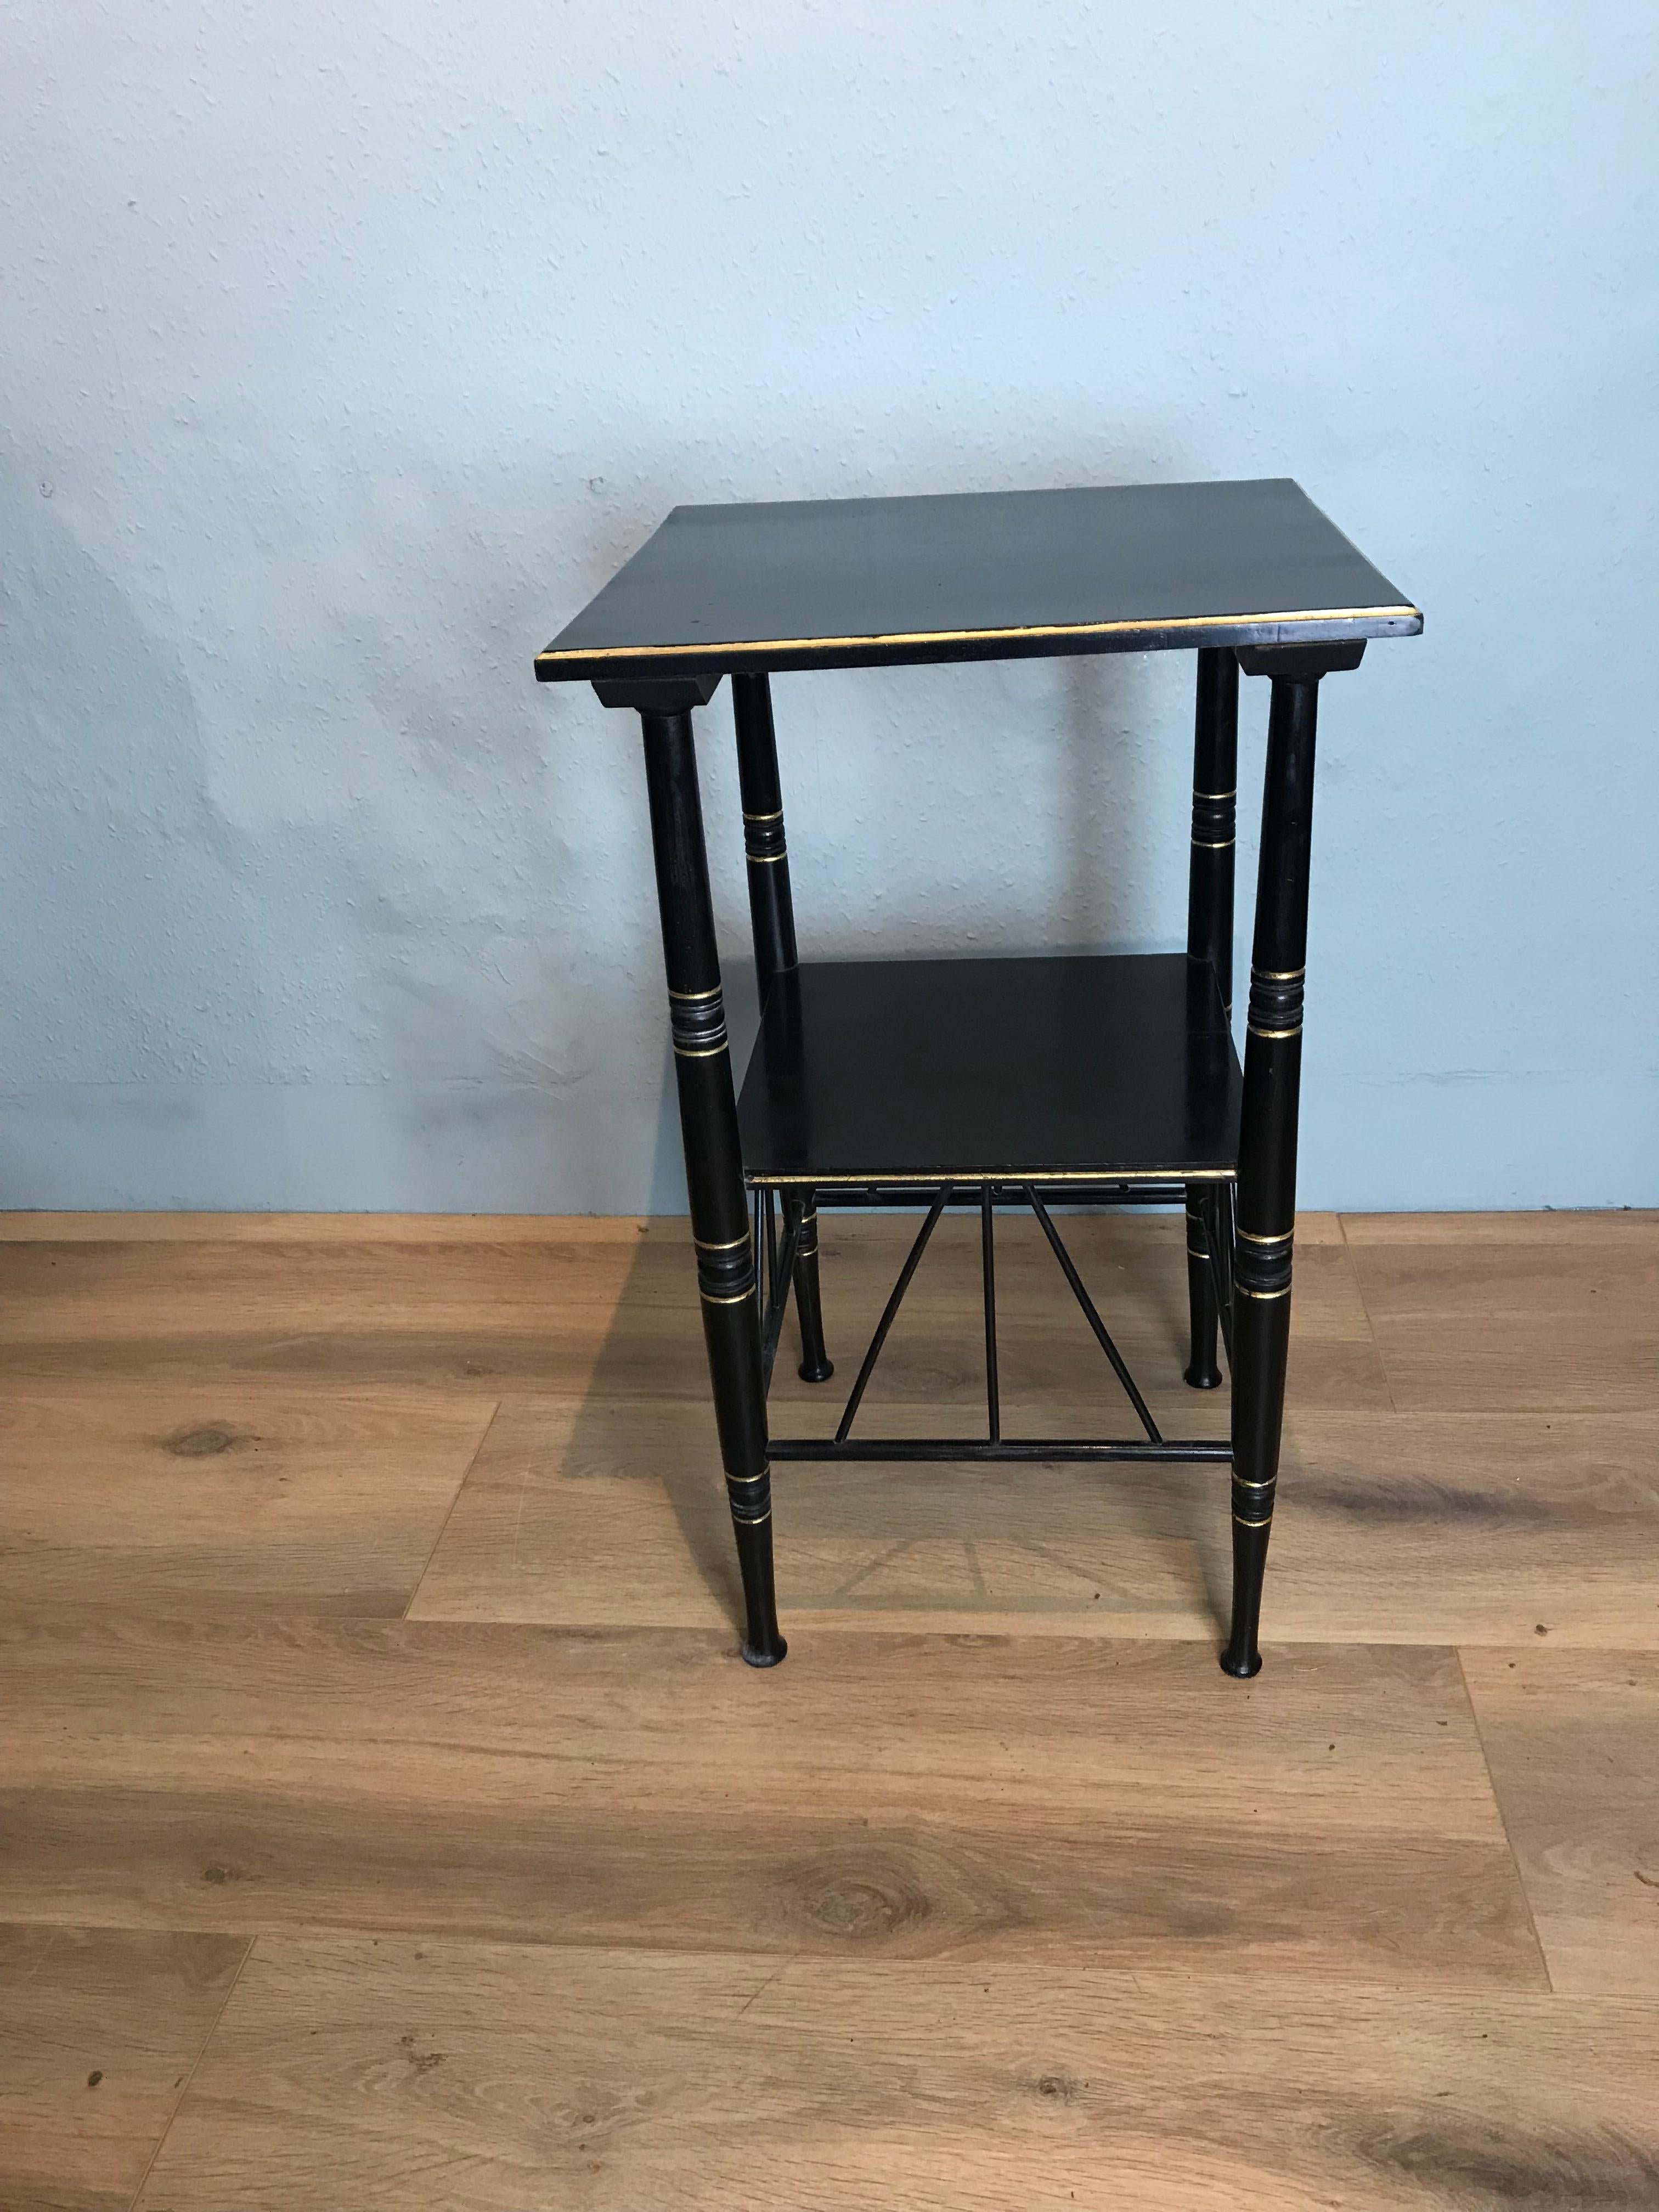 A delicate and slender ebony and parcel gilt E W Godwin style Aesthetic movement side table. This attractive table is in the Egyptian furniture design with elegant turned legs and fine angled brackets.